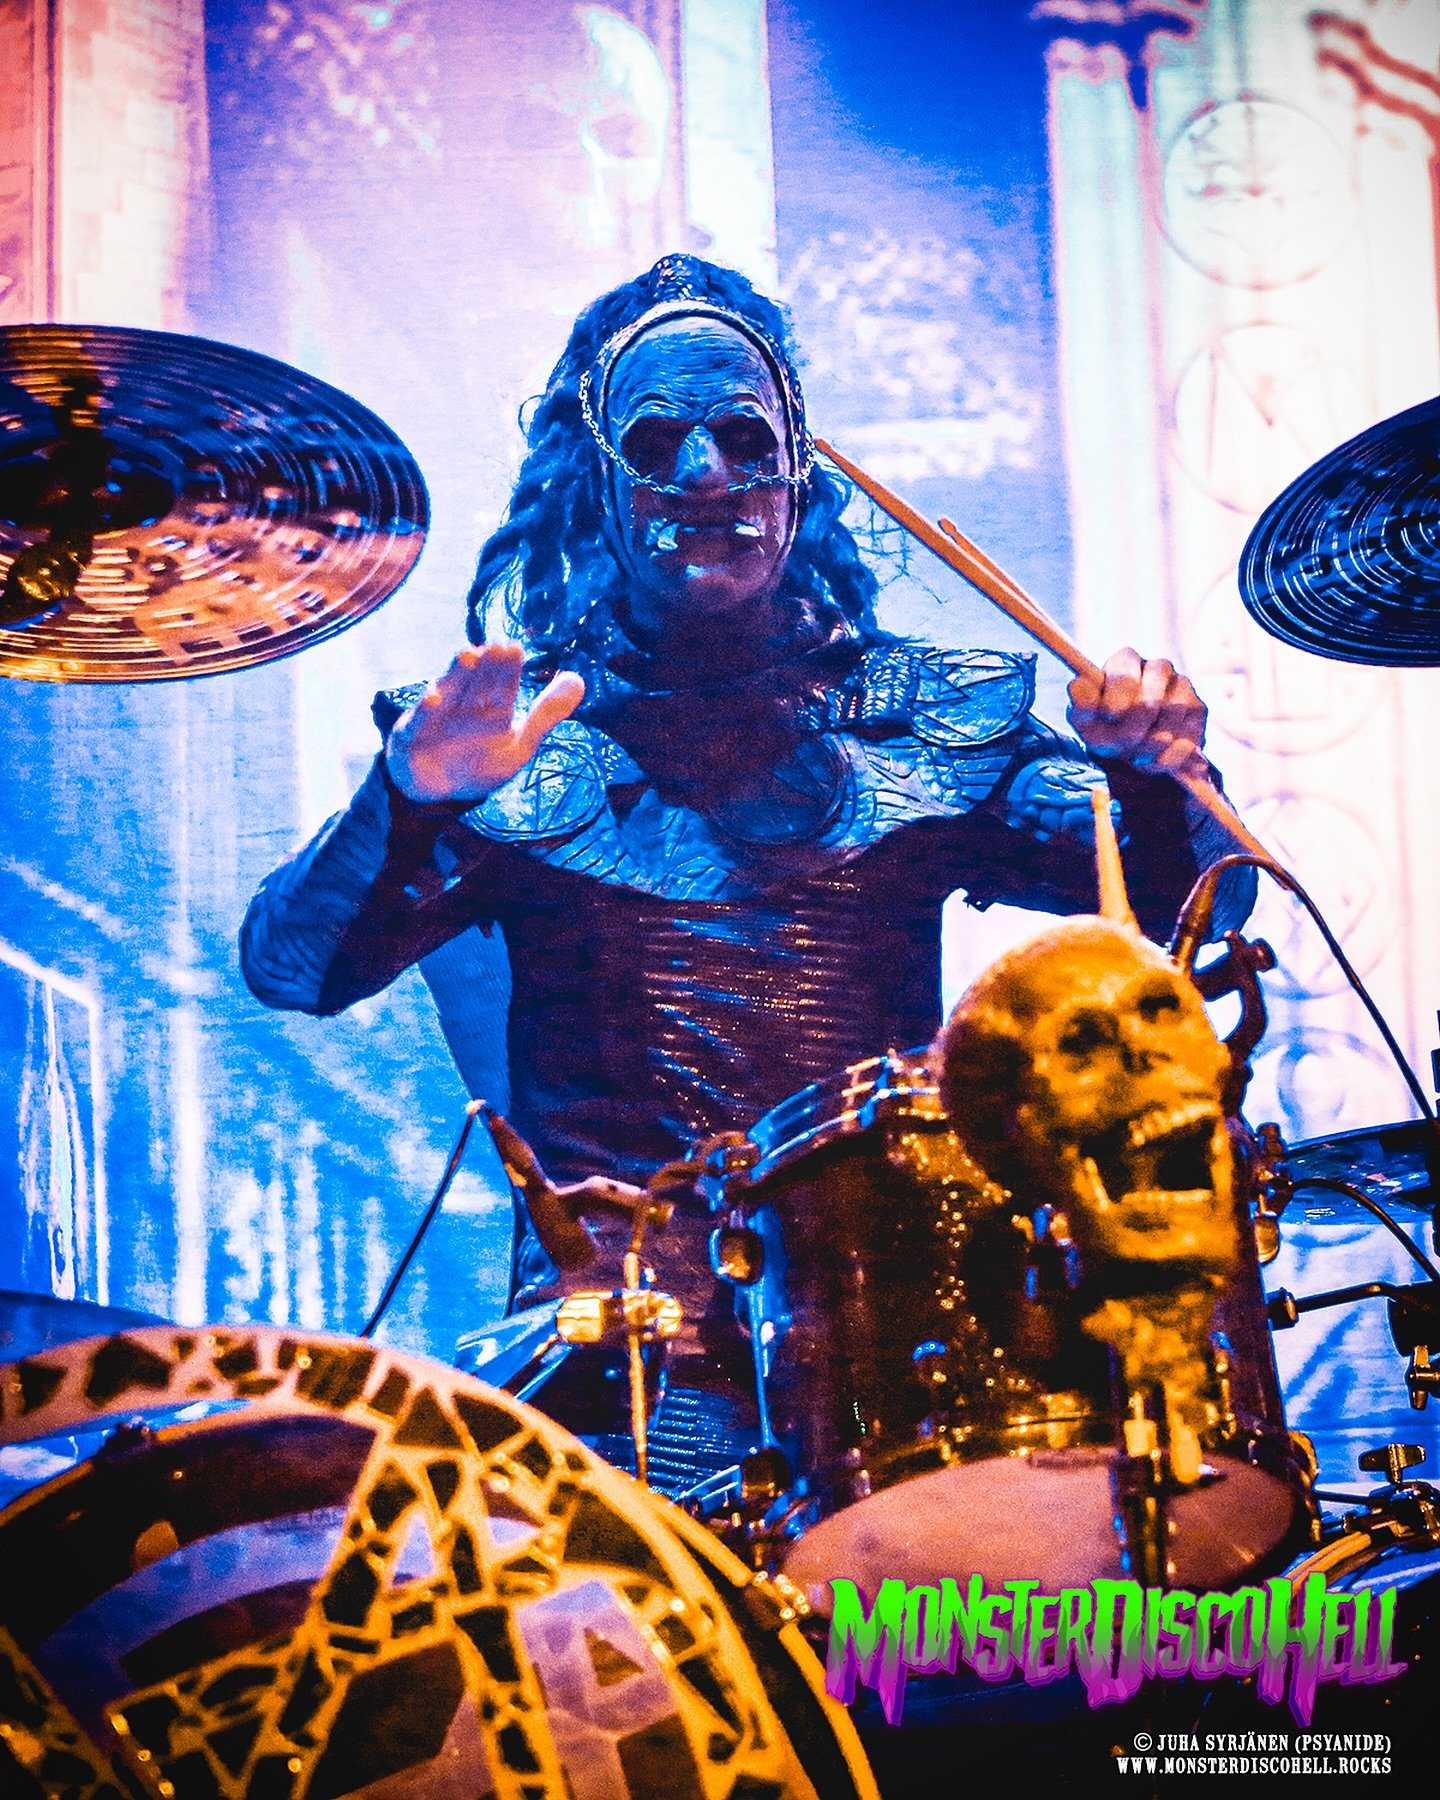 Aah, a new week is upon us again, and we monstermaniacs start it with Manaday as usual! Here&rsquo;s a previously unused shot of the Minister of Sinister trying to calm down the crowd at Tavastia, Helsinki on December 8th 2022. For some reason, the c